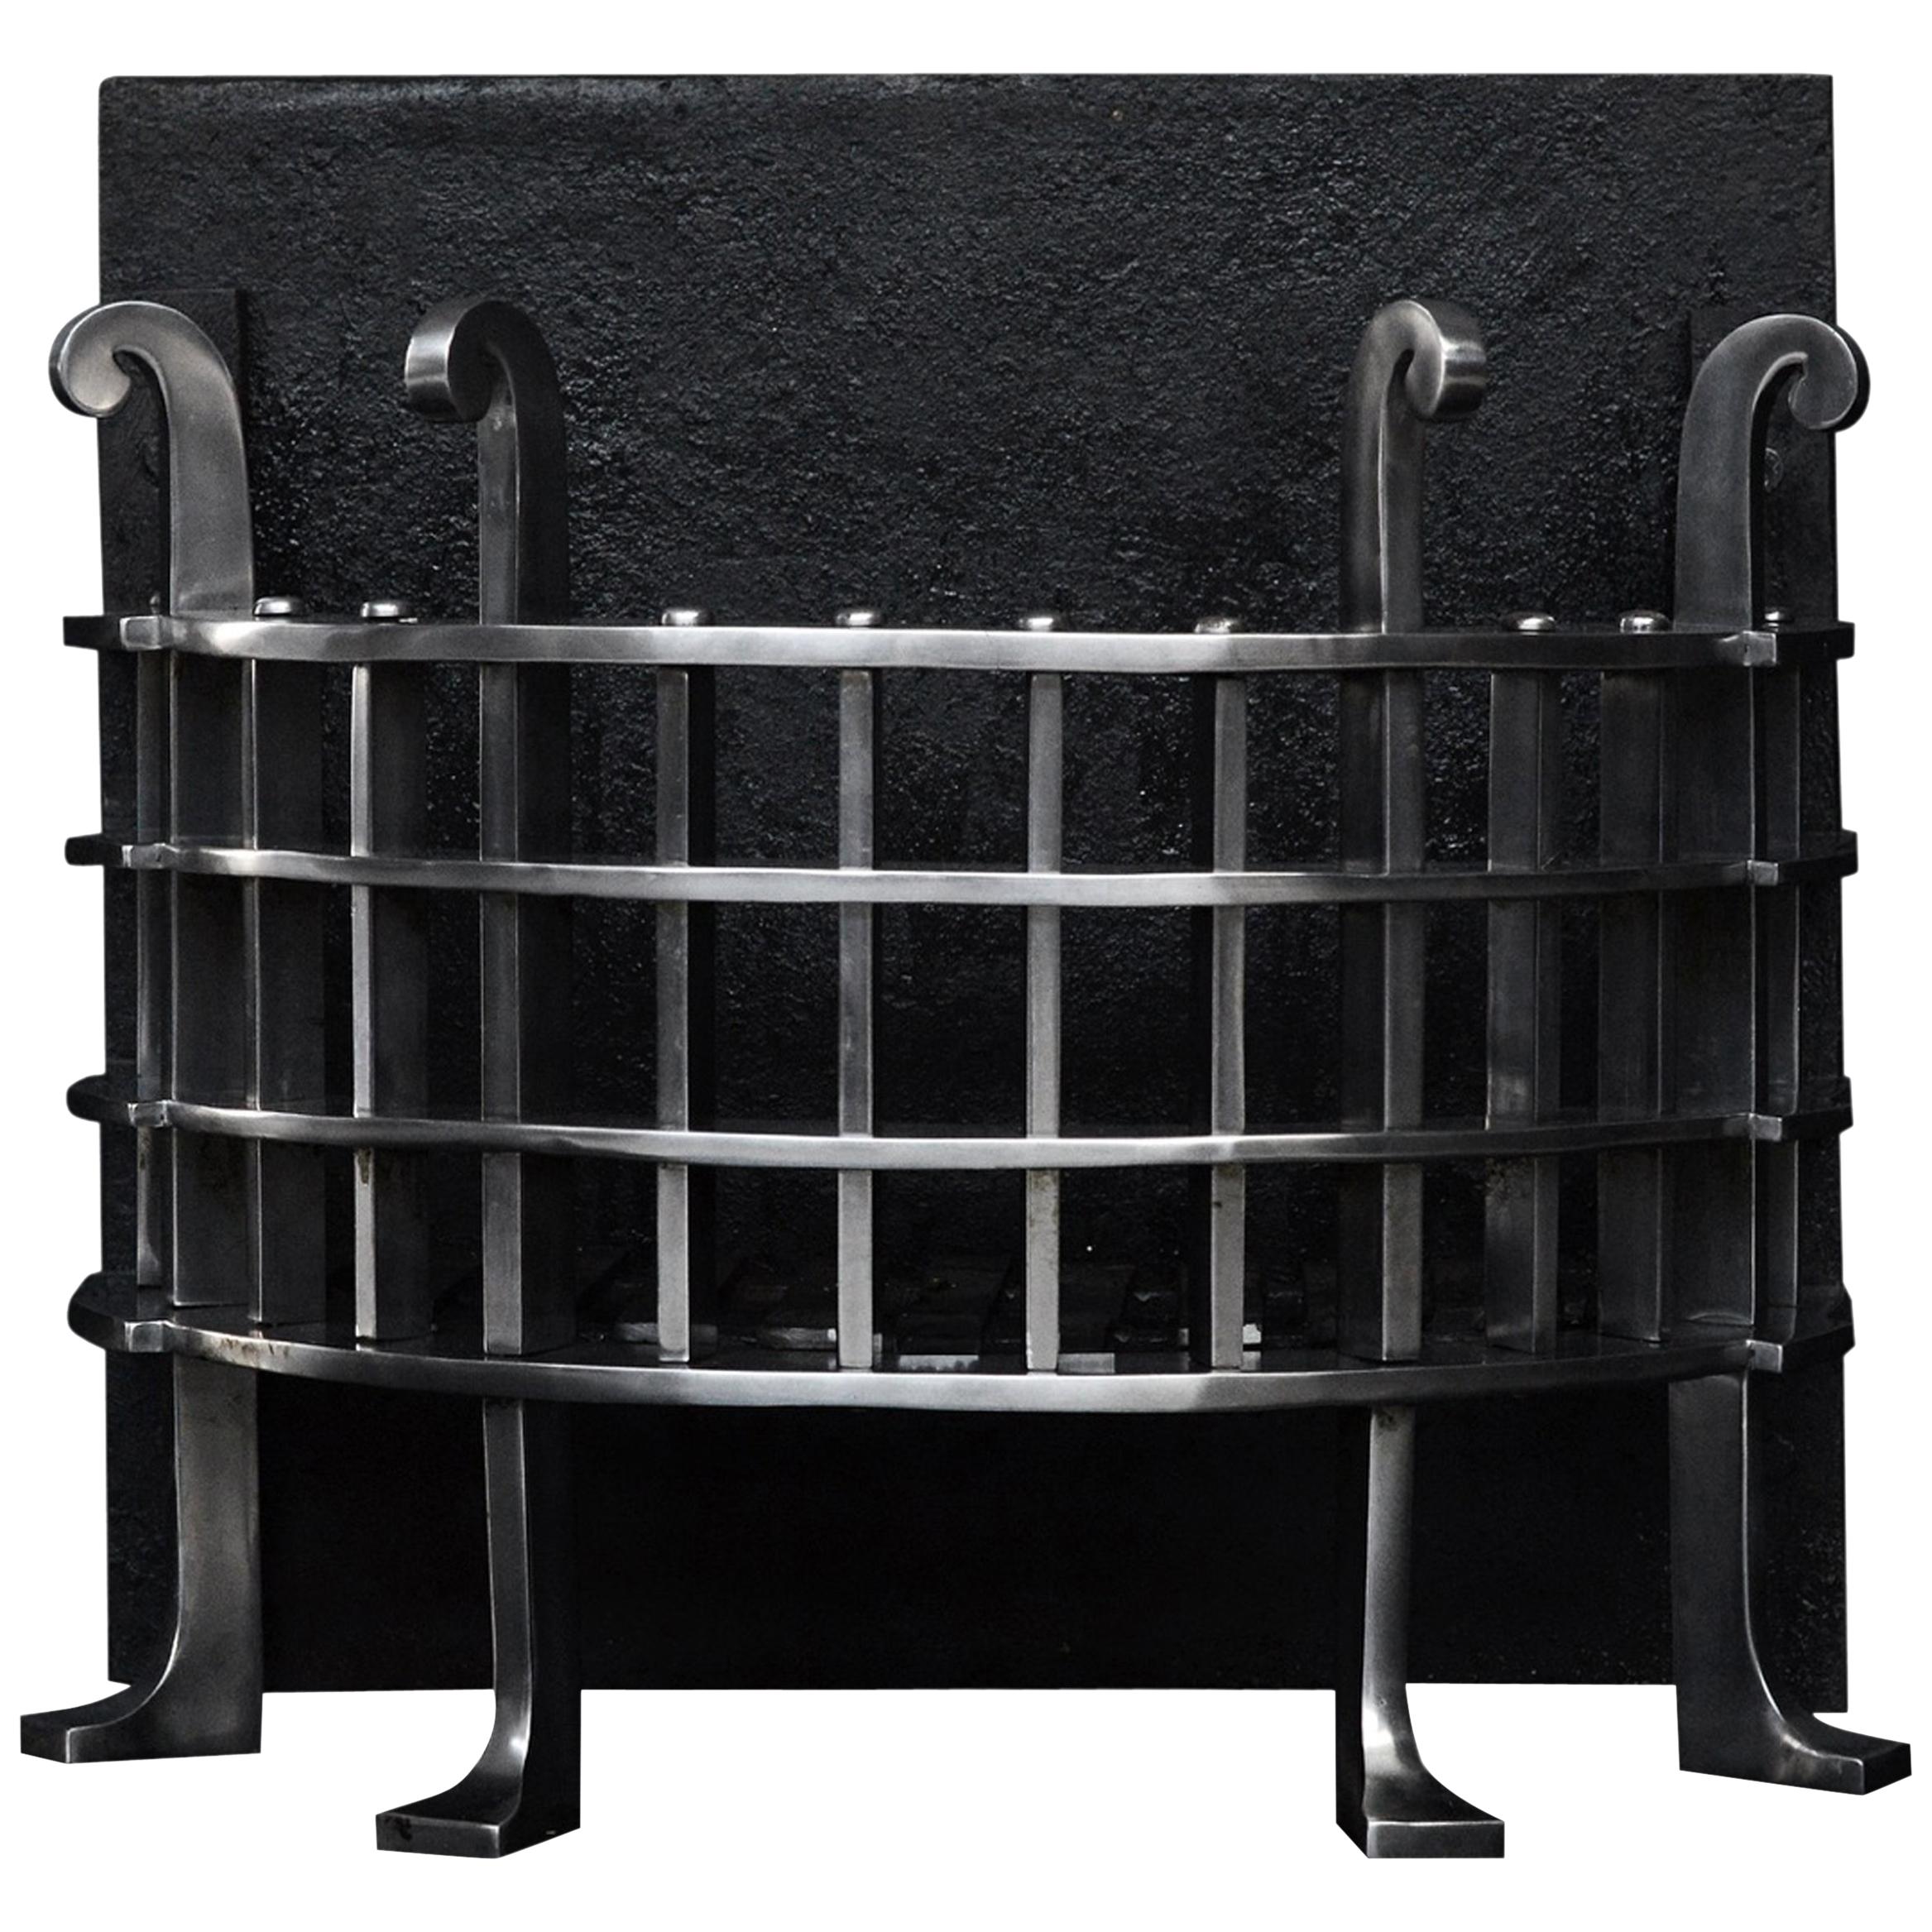 Half Round English Iron Fire Grate For Sale